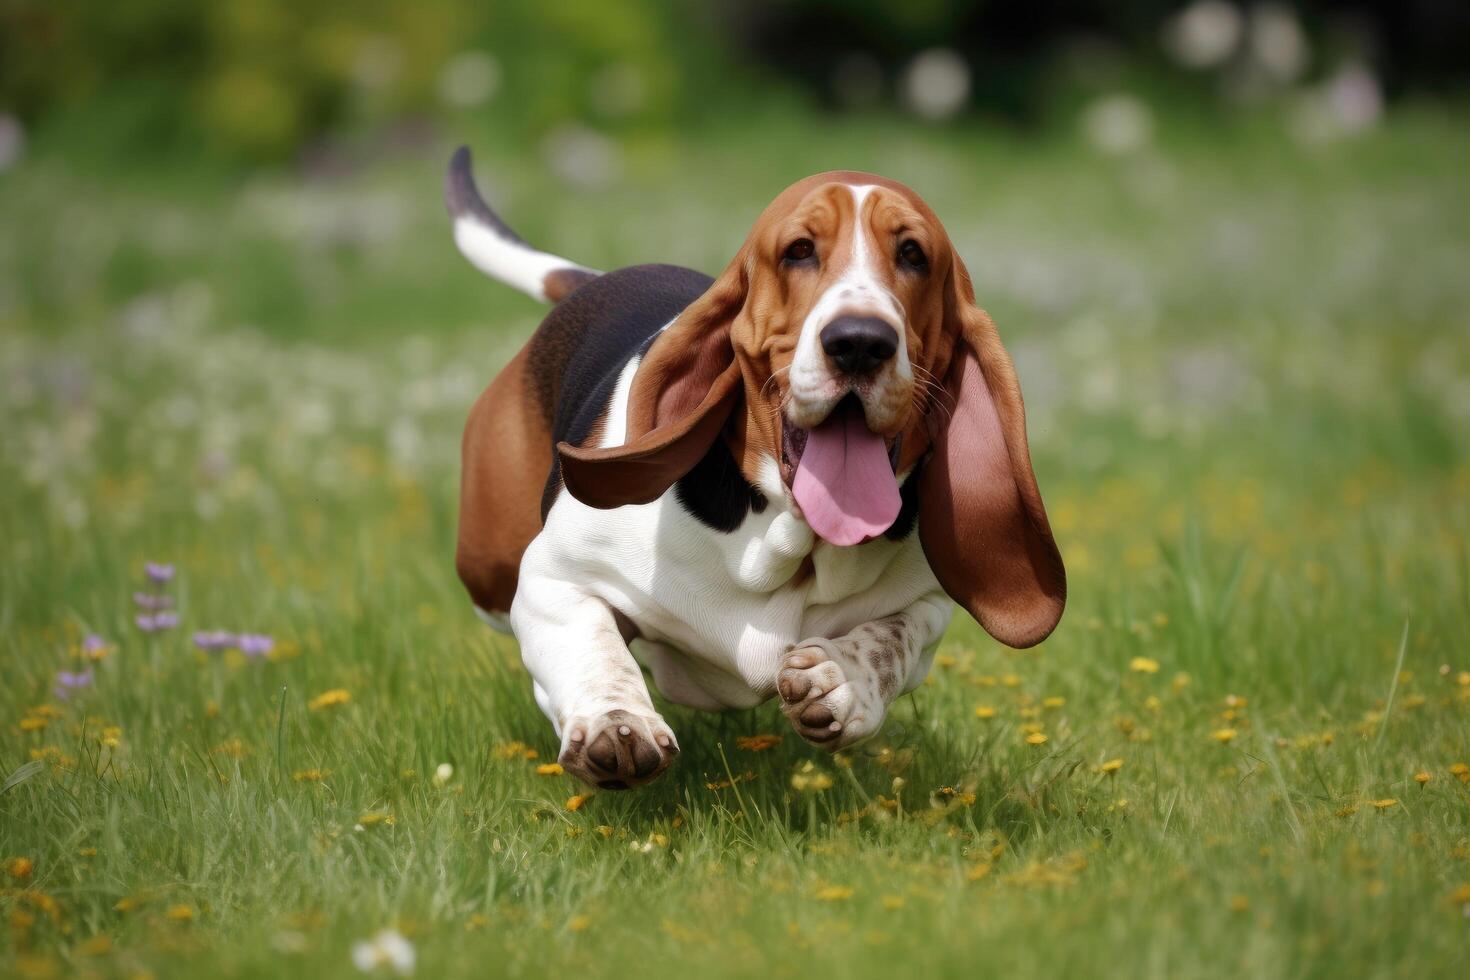 Basset hound dog running and jumping in the green grass photo